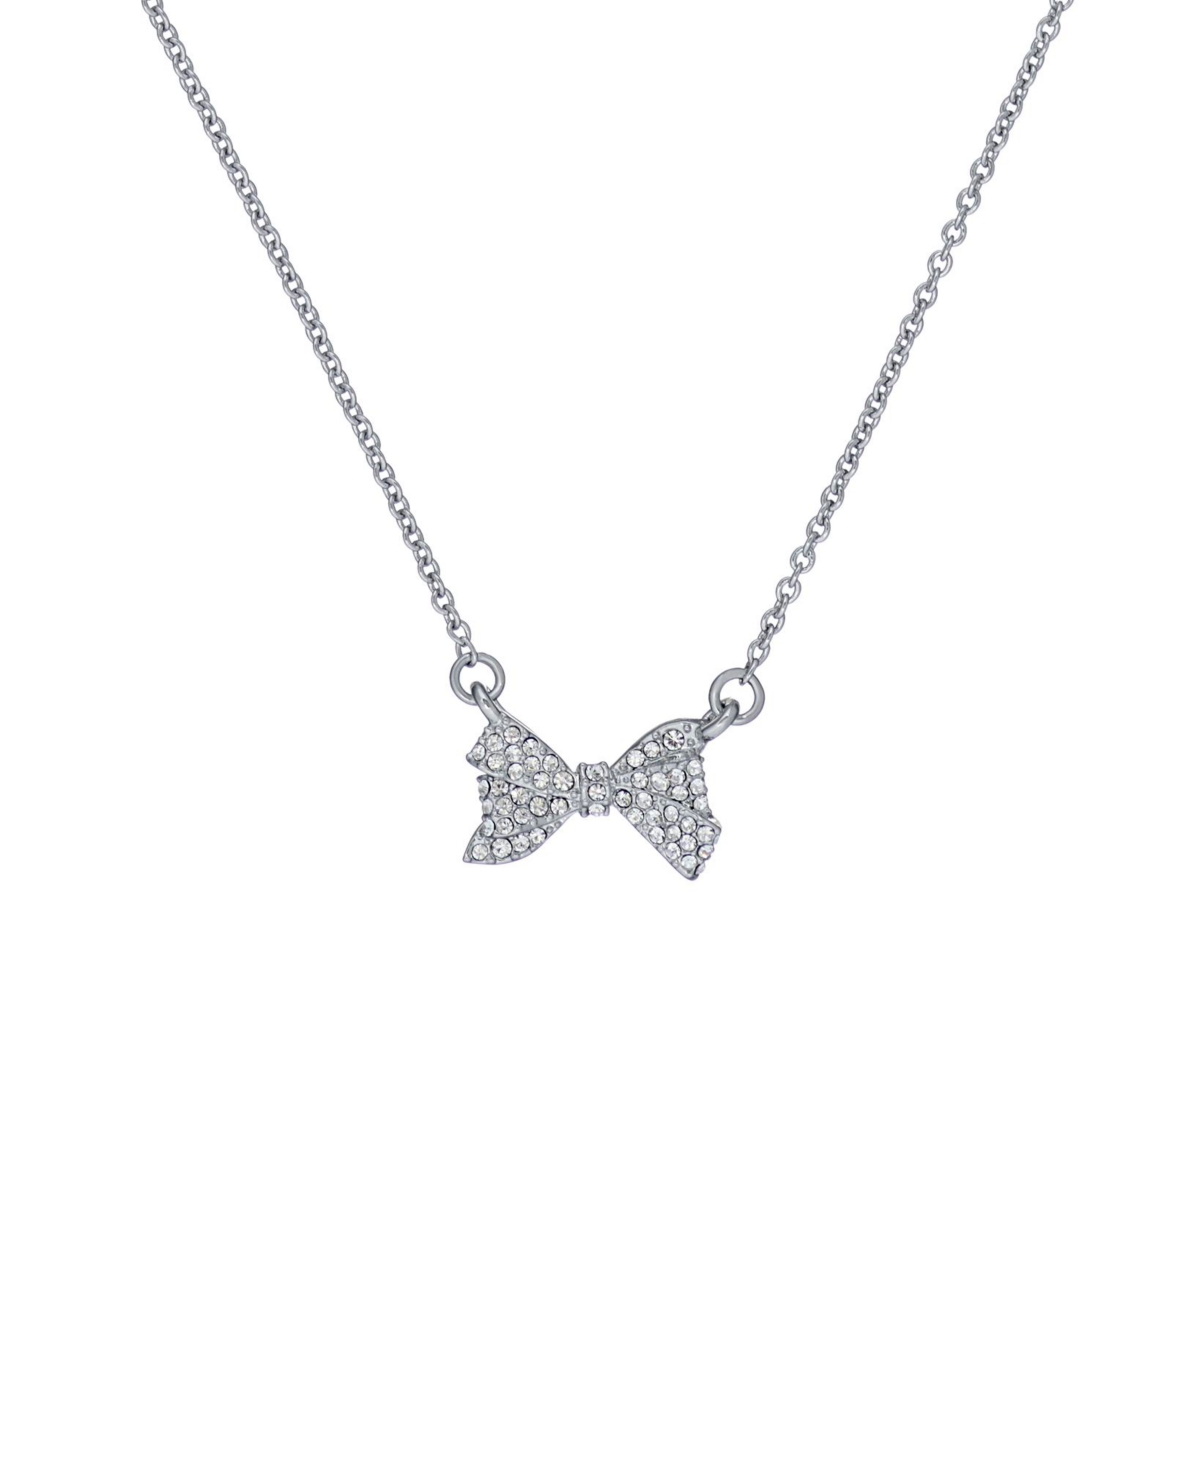 Barsie: Crystal Bow Pendant Necklace - Silver